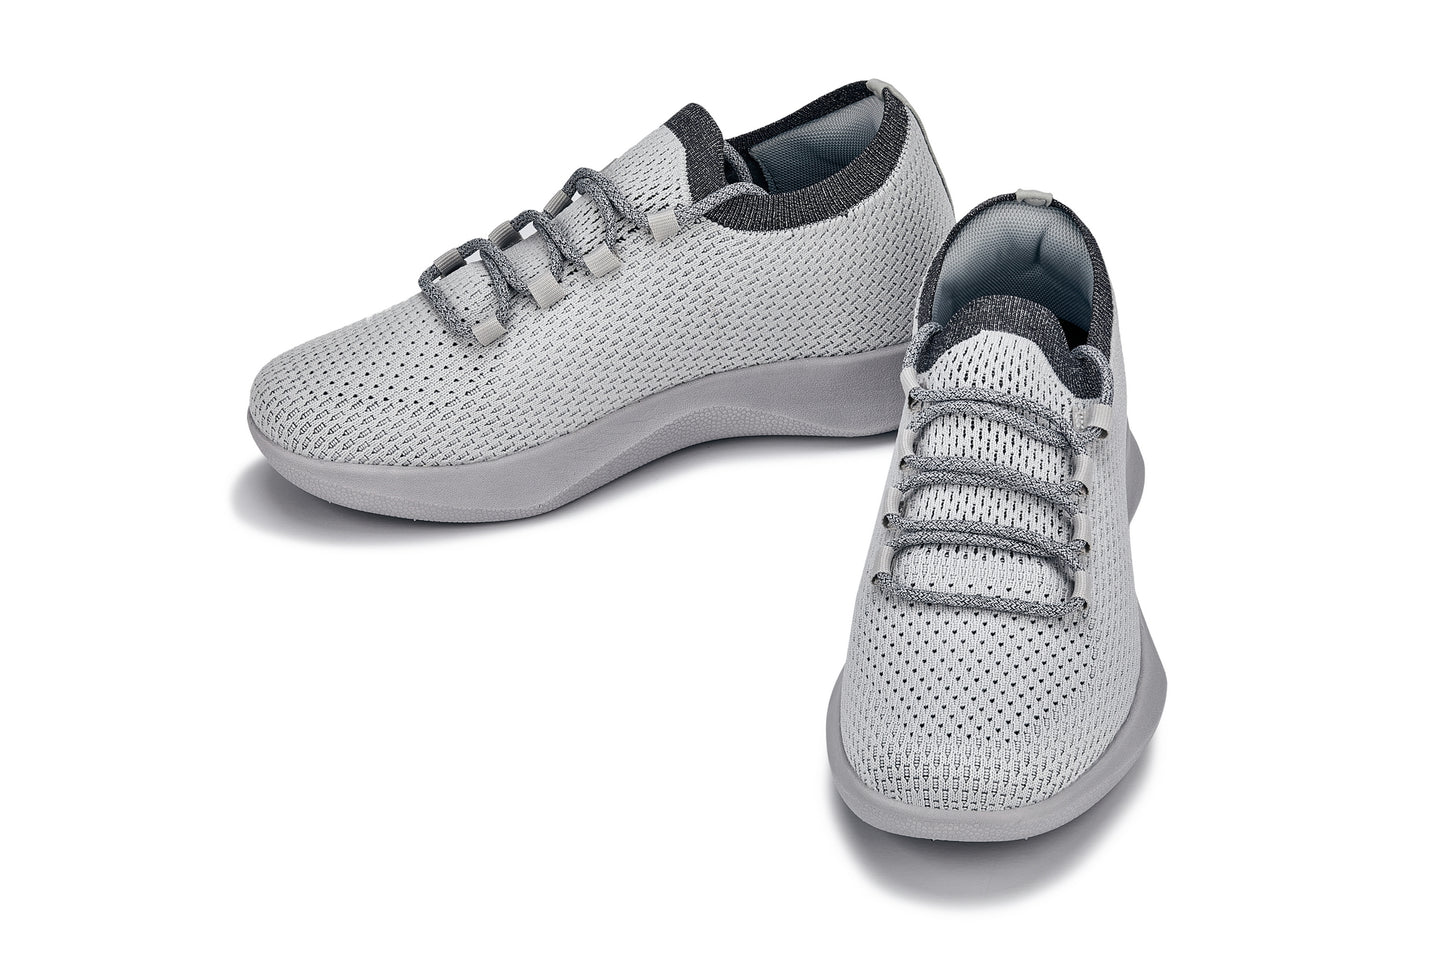 CALTO - Q087 - 2.4 Inches Taller (Cement) - Ultra Lightweight Sneakers